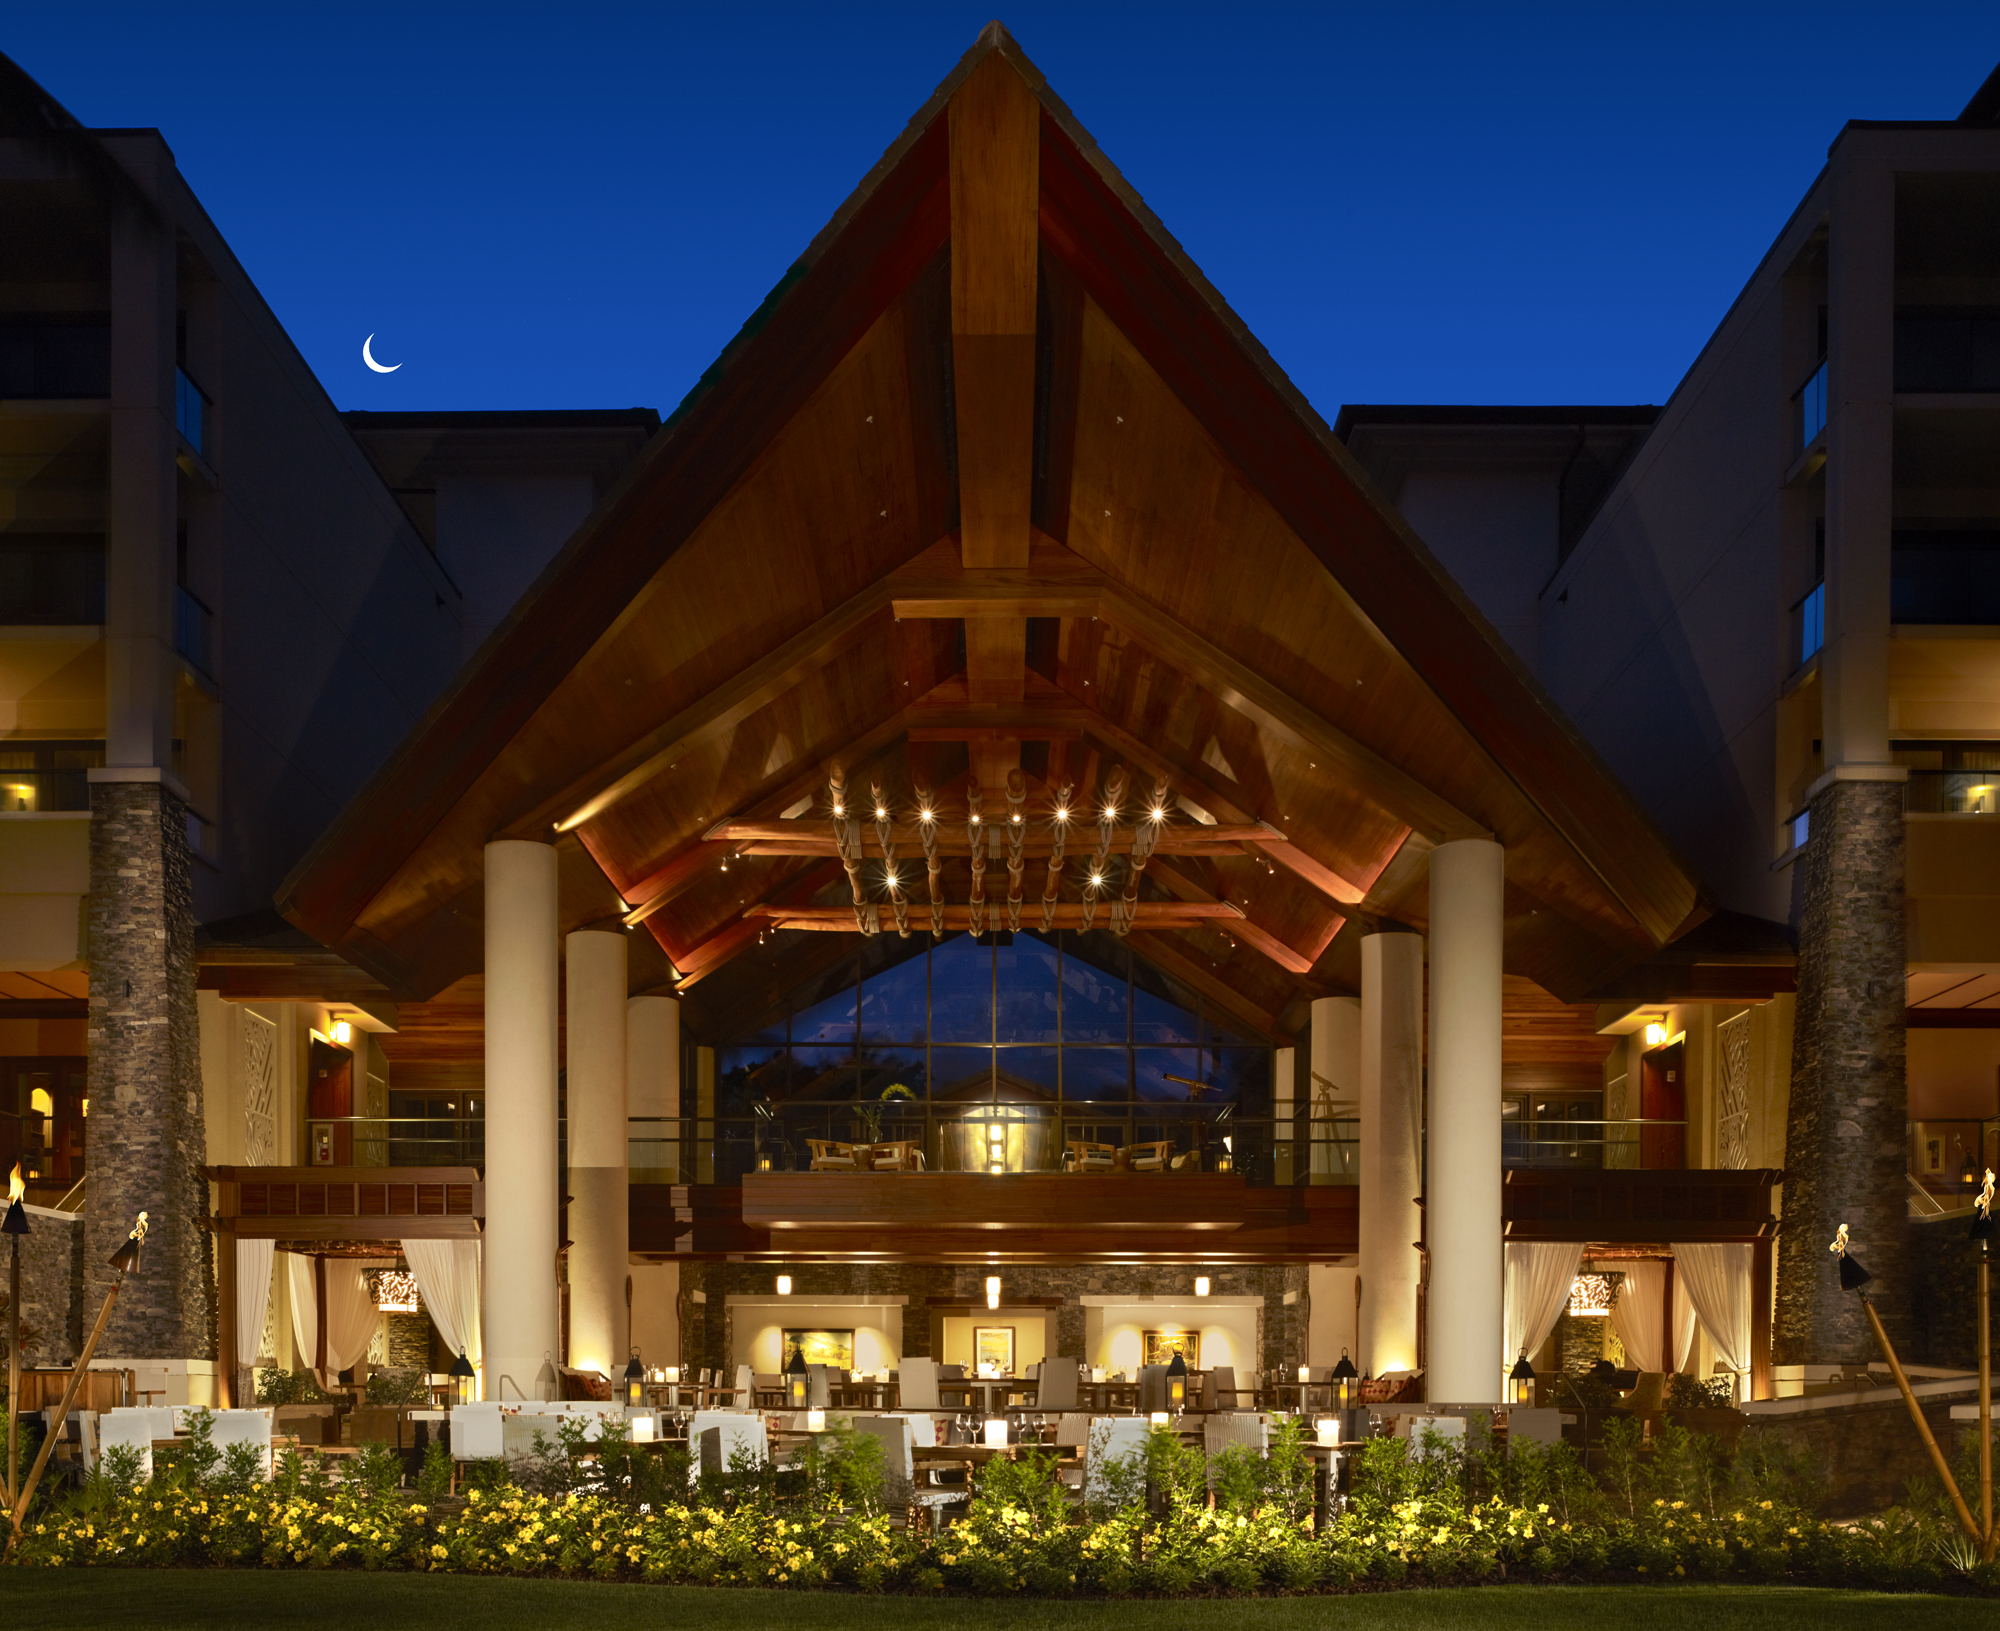 Cane & Canoe – Resort’s signature restaurant with an outdoor patio, serving breakfast and dinner daily